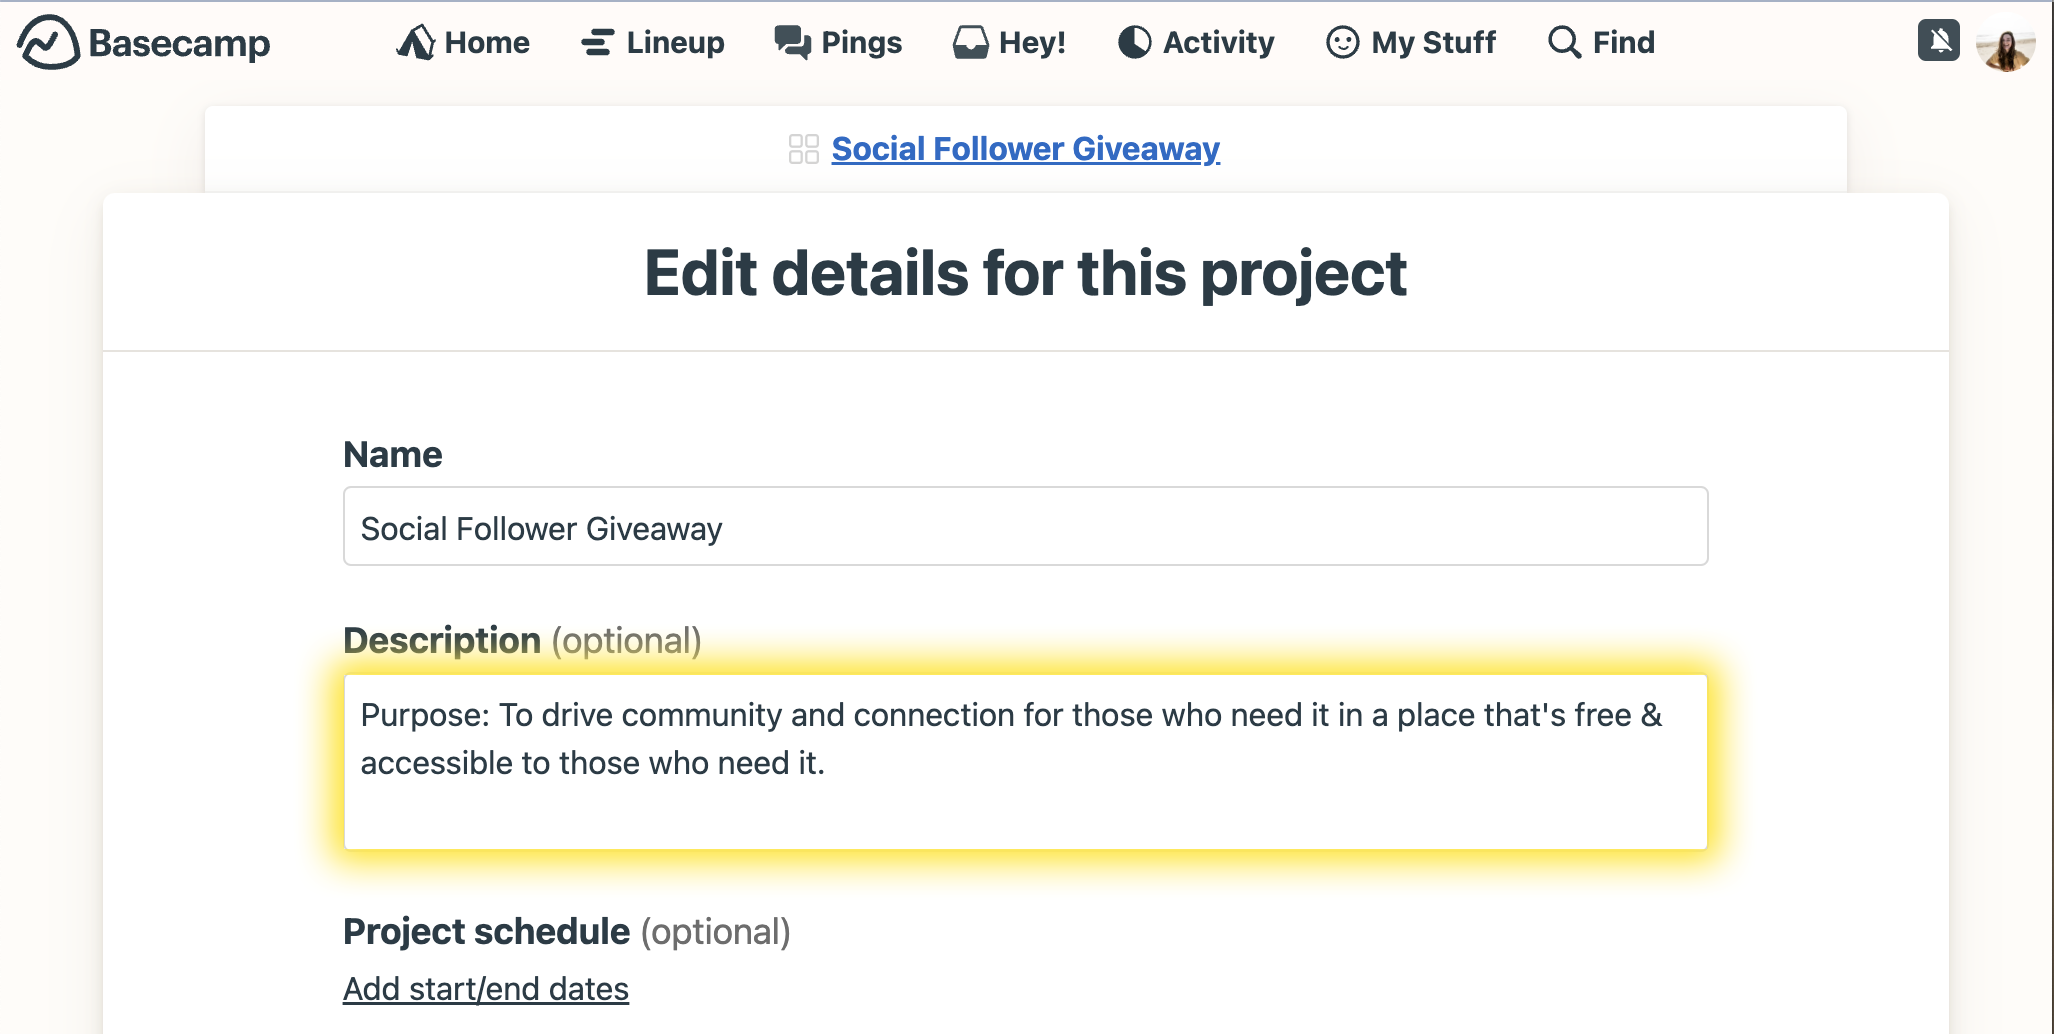 Example of editing a project description to include the purpose inside Basecamp.